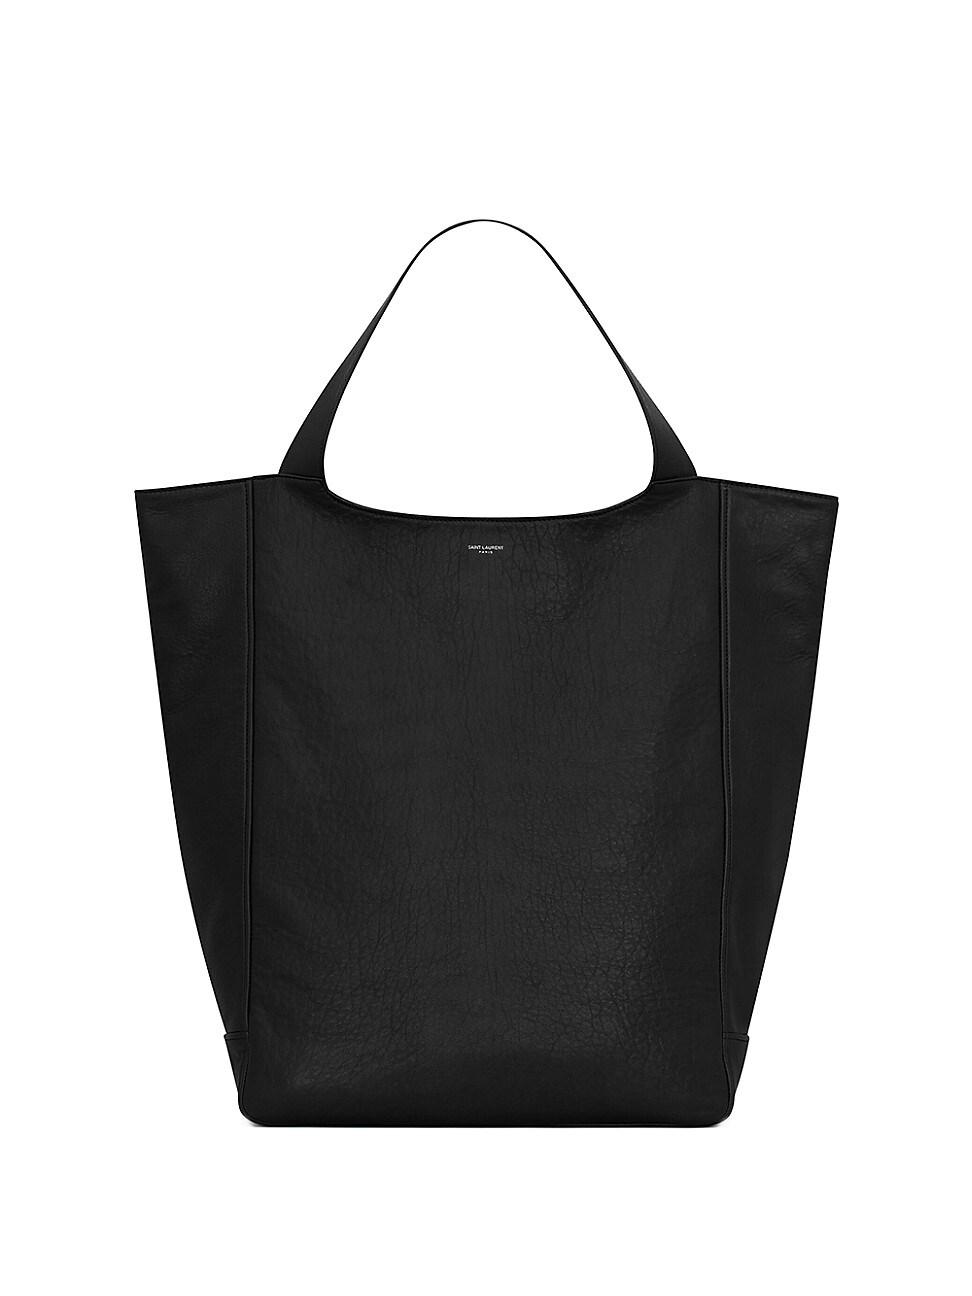 Saint Laurent Maxi Tote In Grained Leather in Black | Lyst